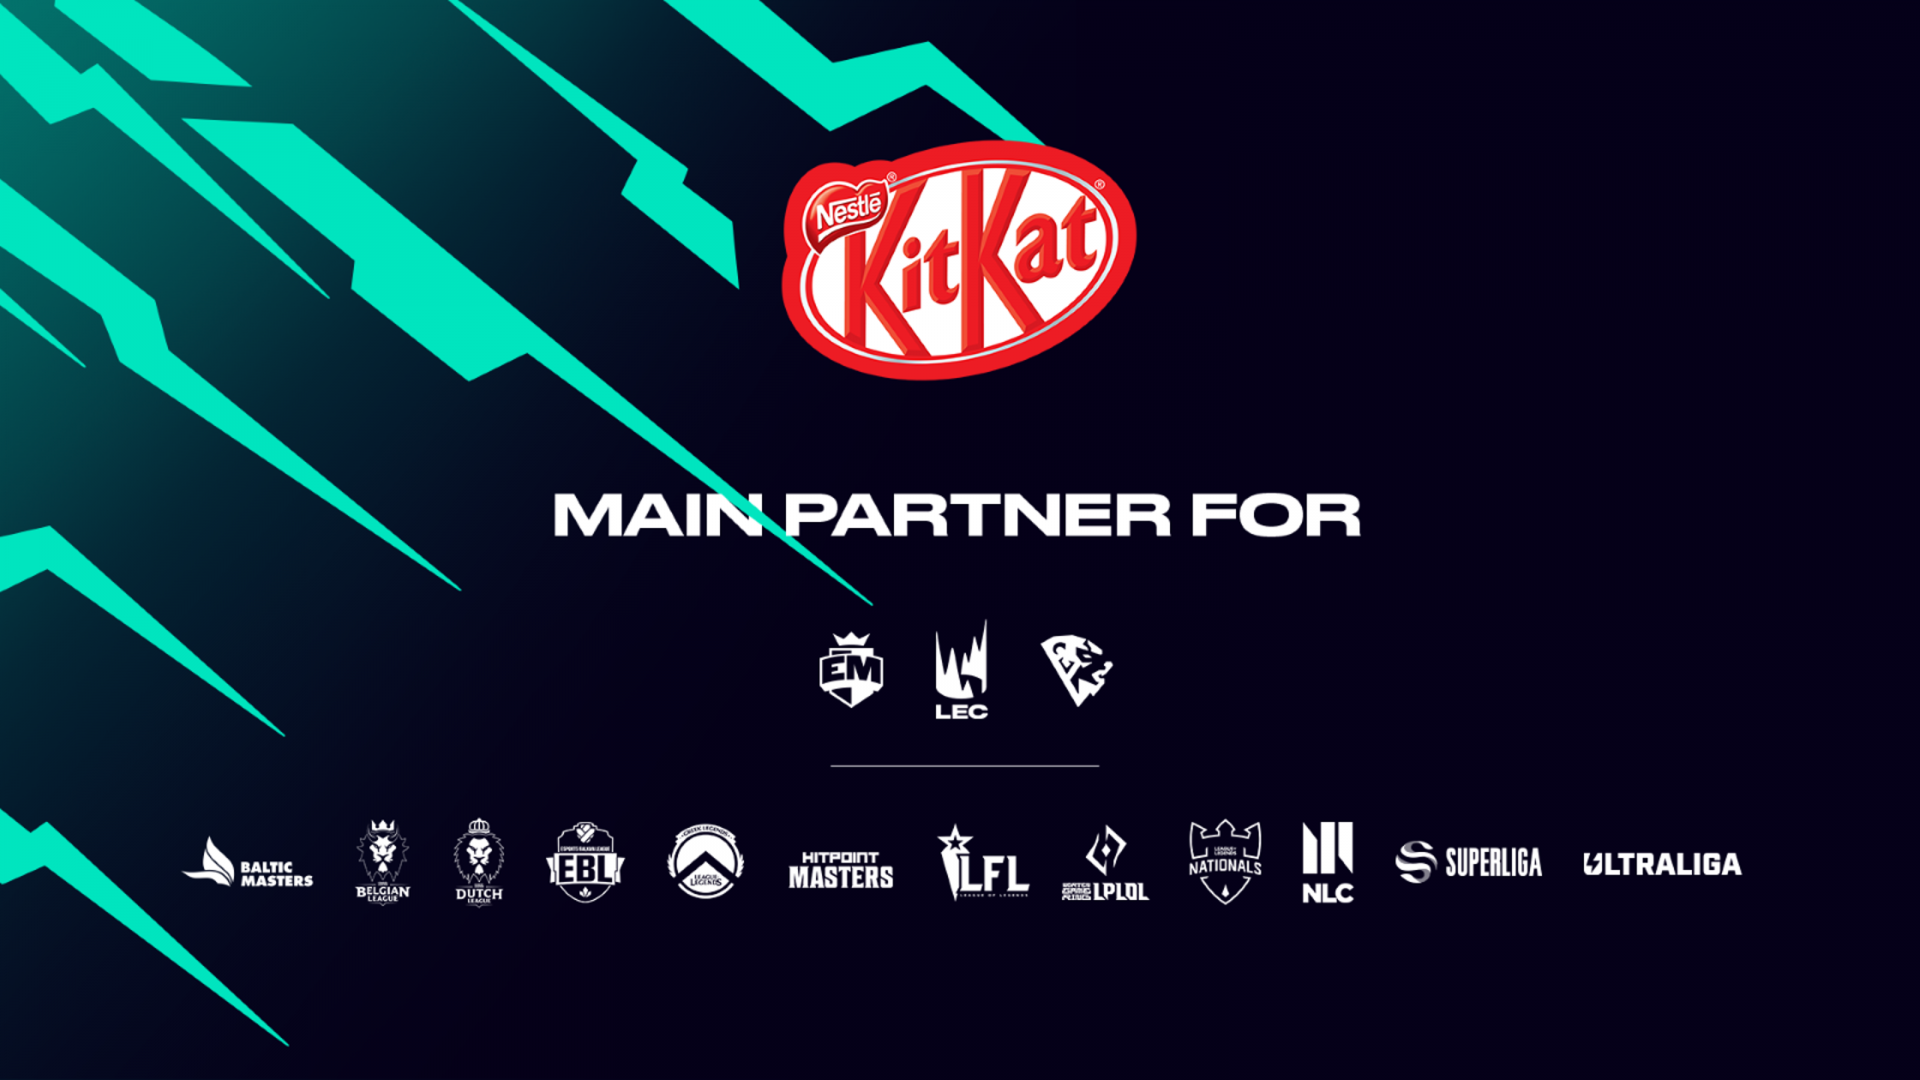 Riot Games, LEC, EU Masters and LCL partners with KitKat